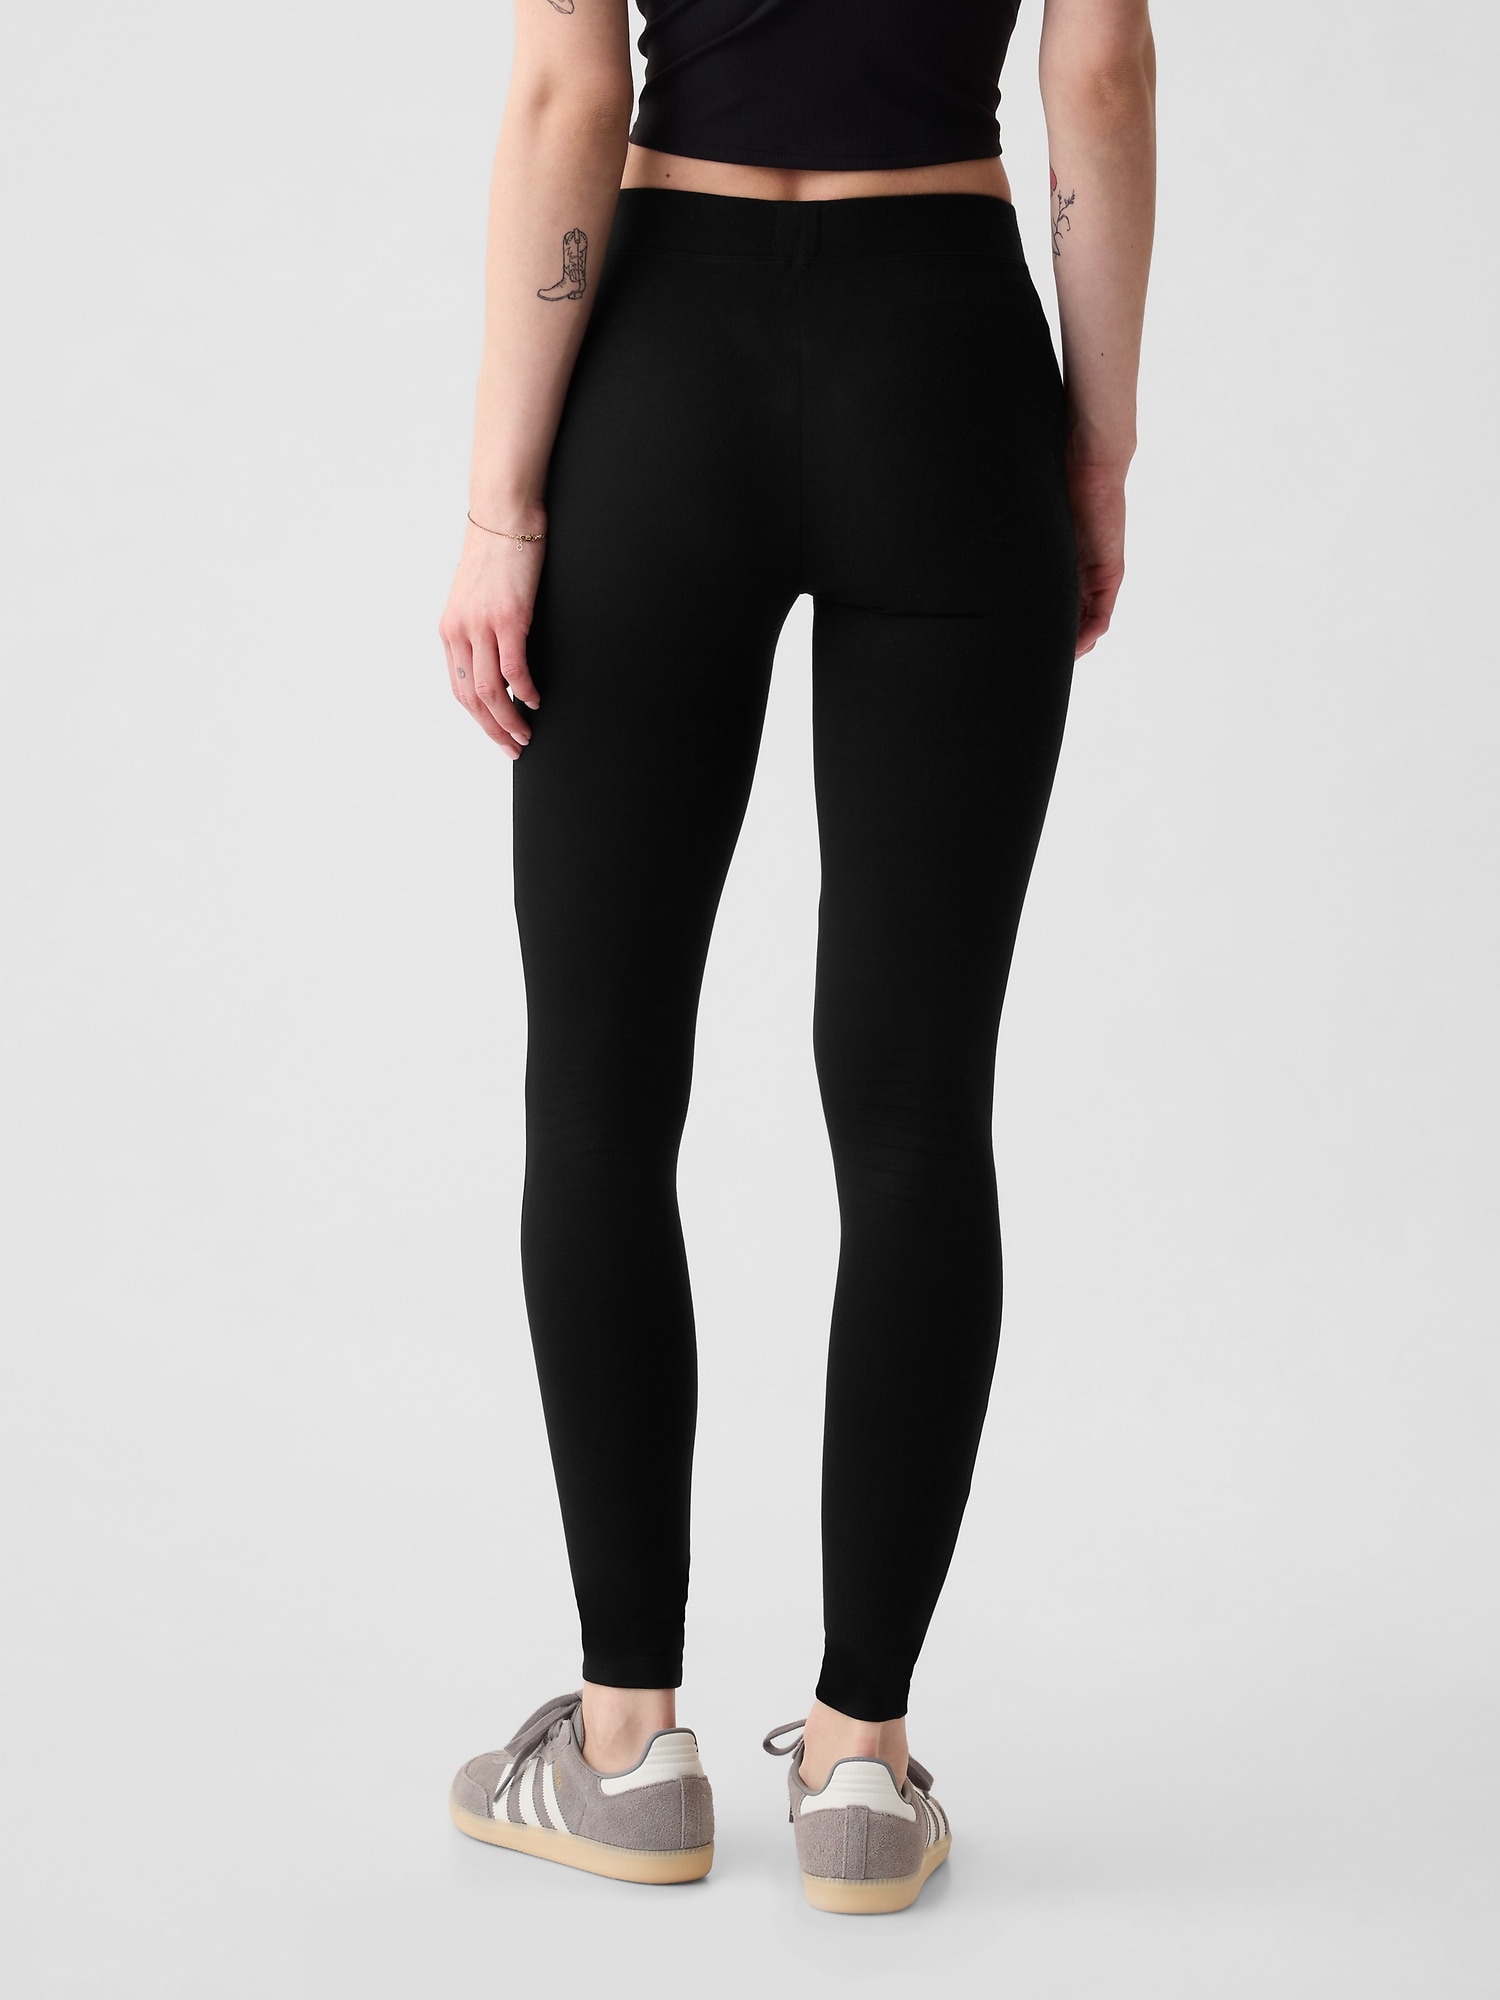 Plain Casual Wear Ladies Legging, Size: Small, Medium, Large at Rs